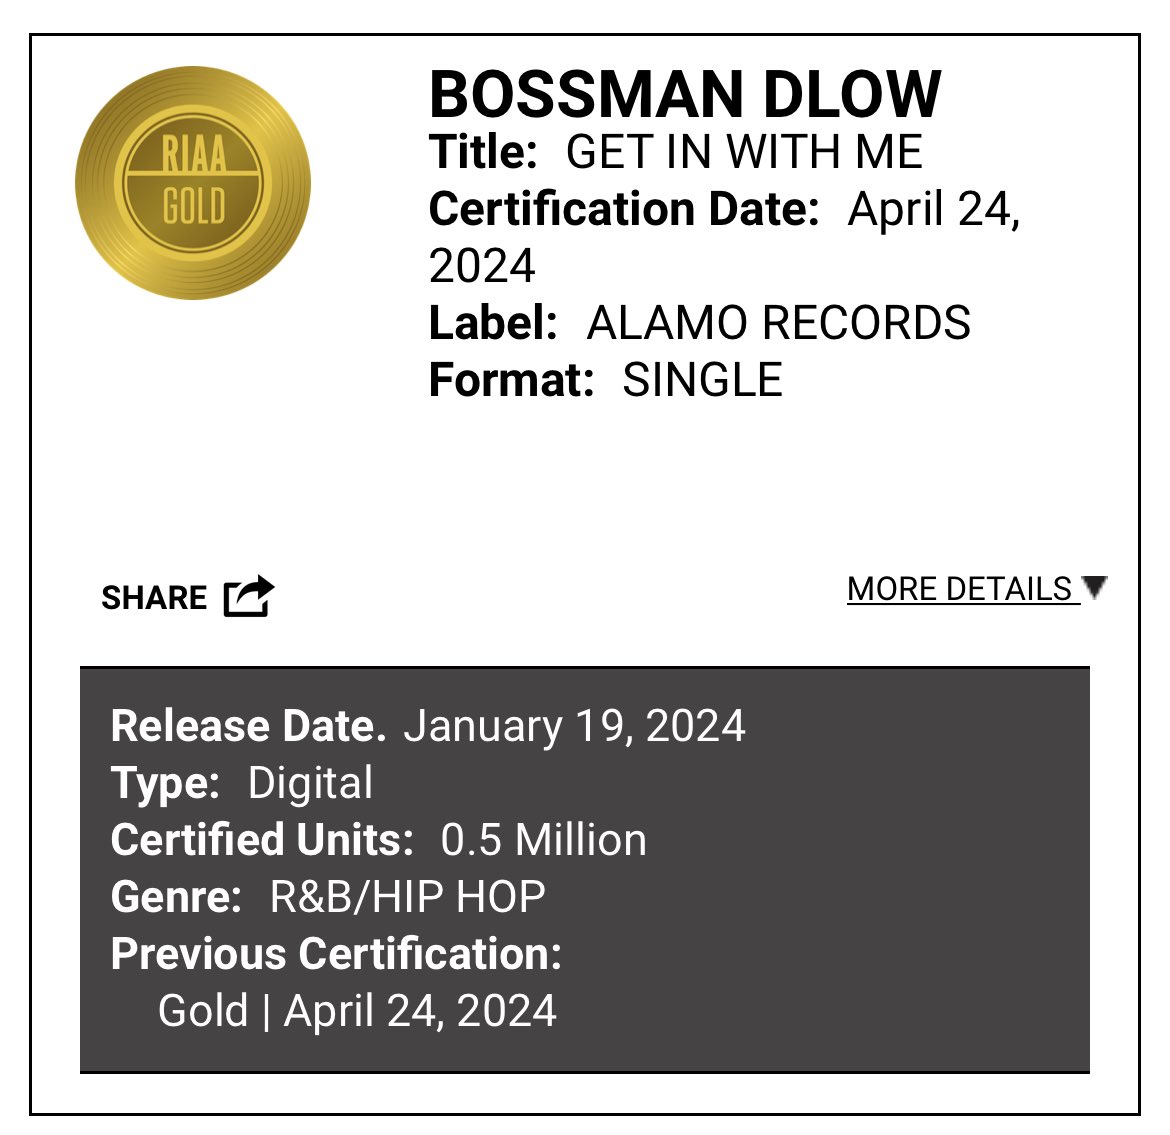 “Get In With Me” by BossMan DLow is certified gold by @RIAA